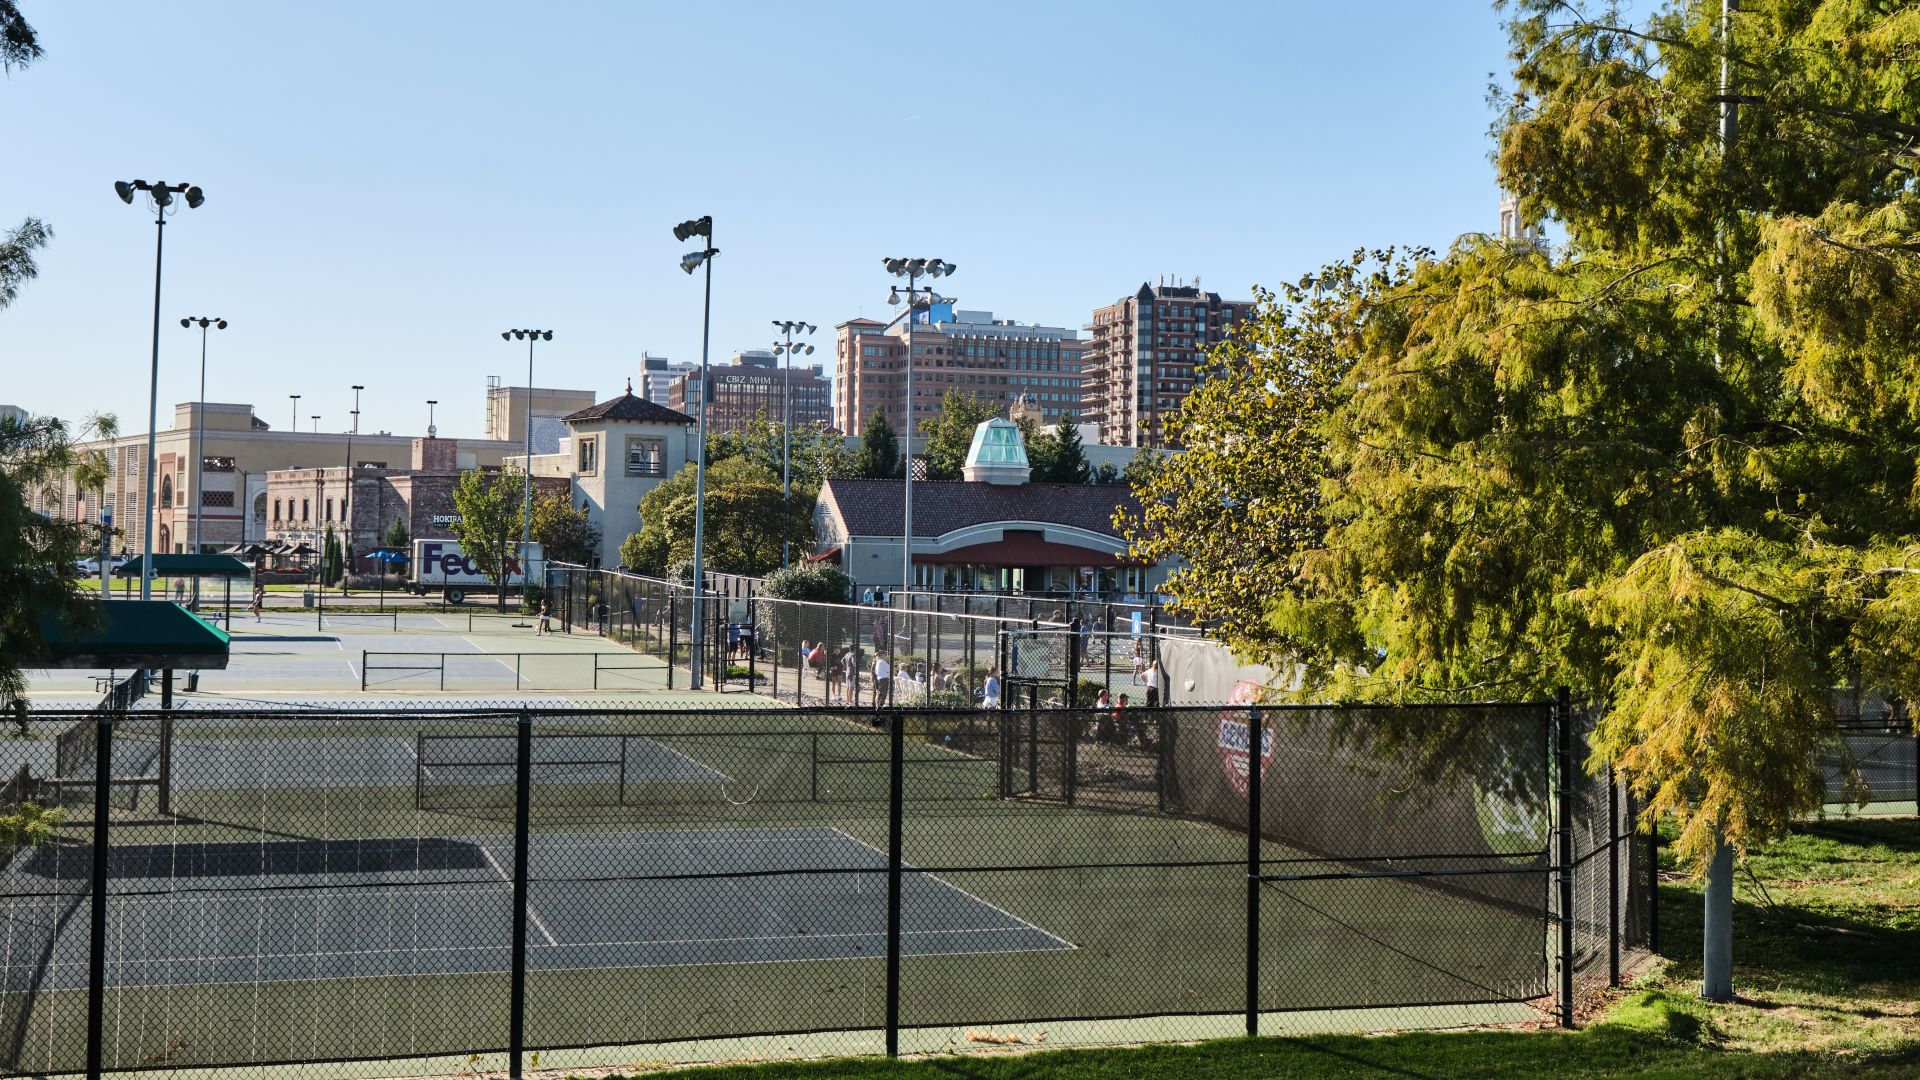 Image - Plaza Tennis Center Under New Management Amid Country Club Plaza Uncertainty